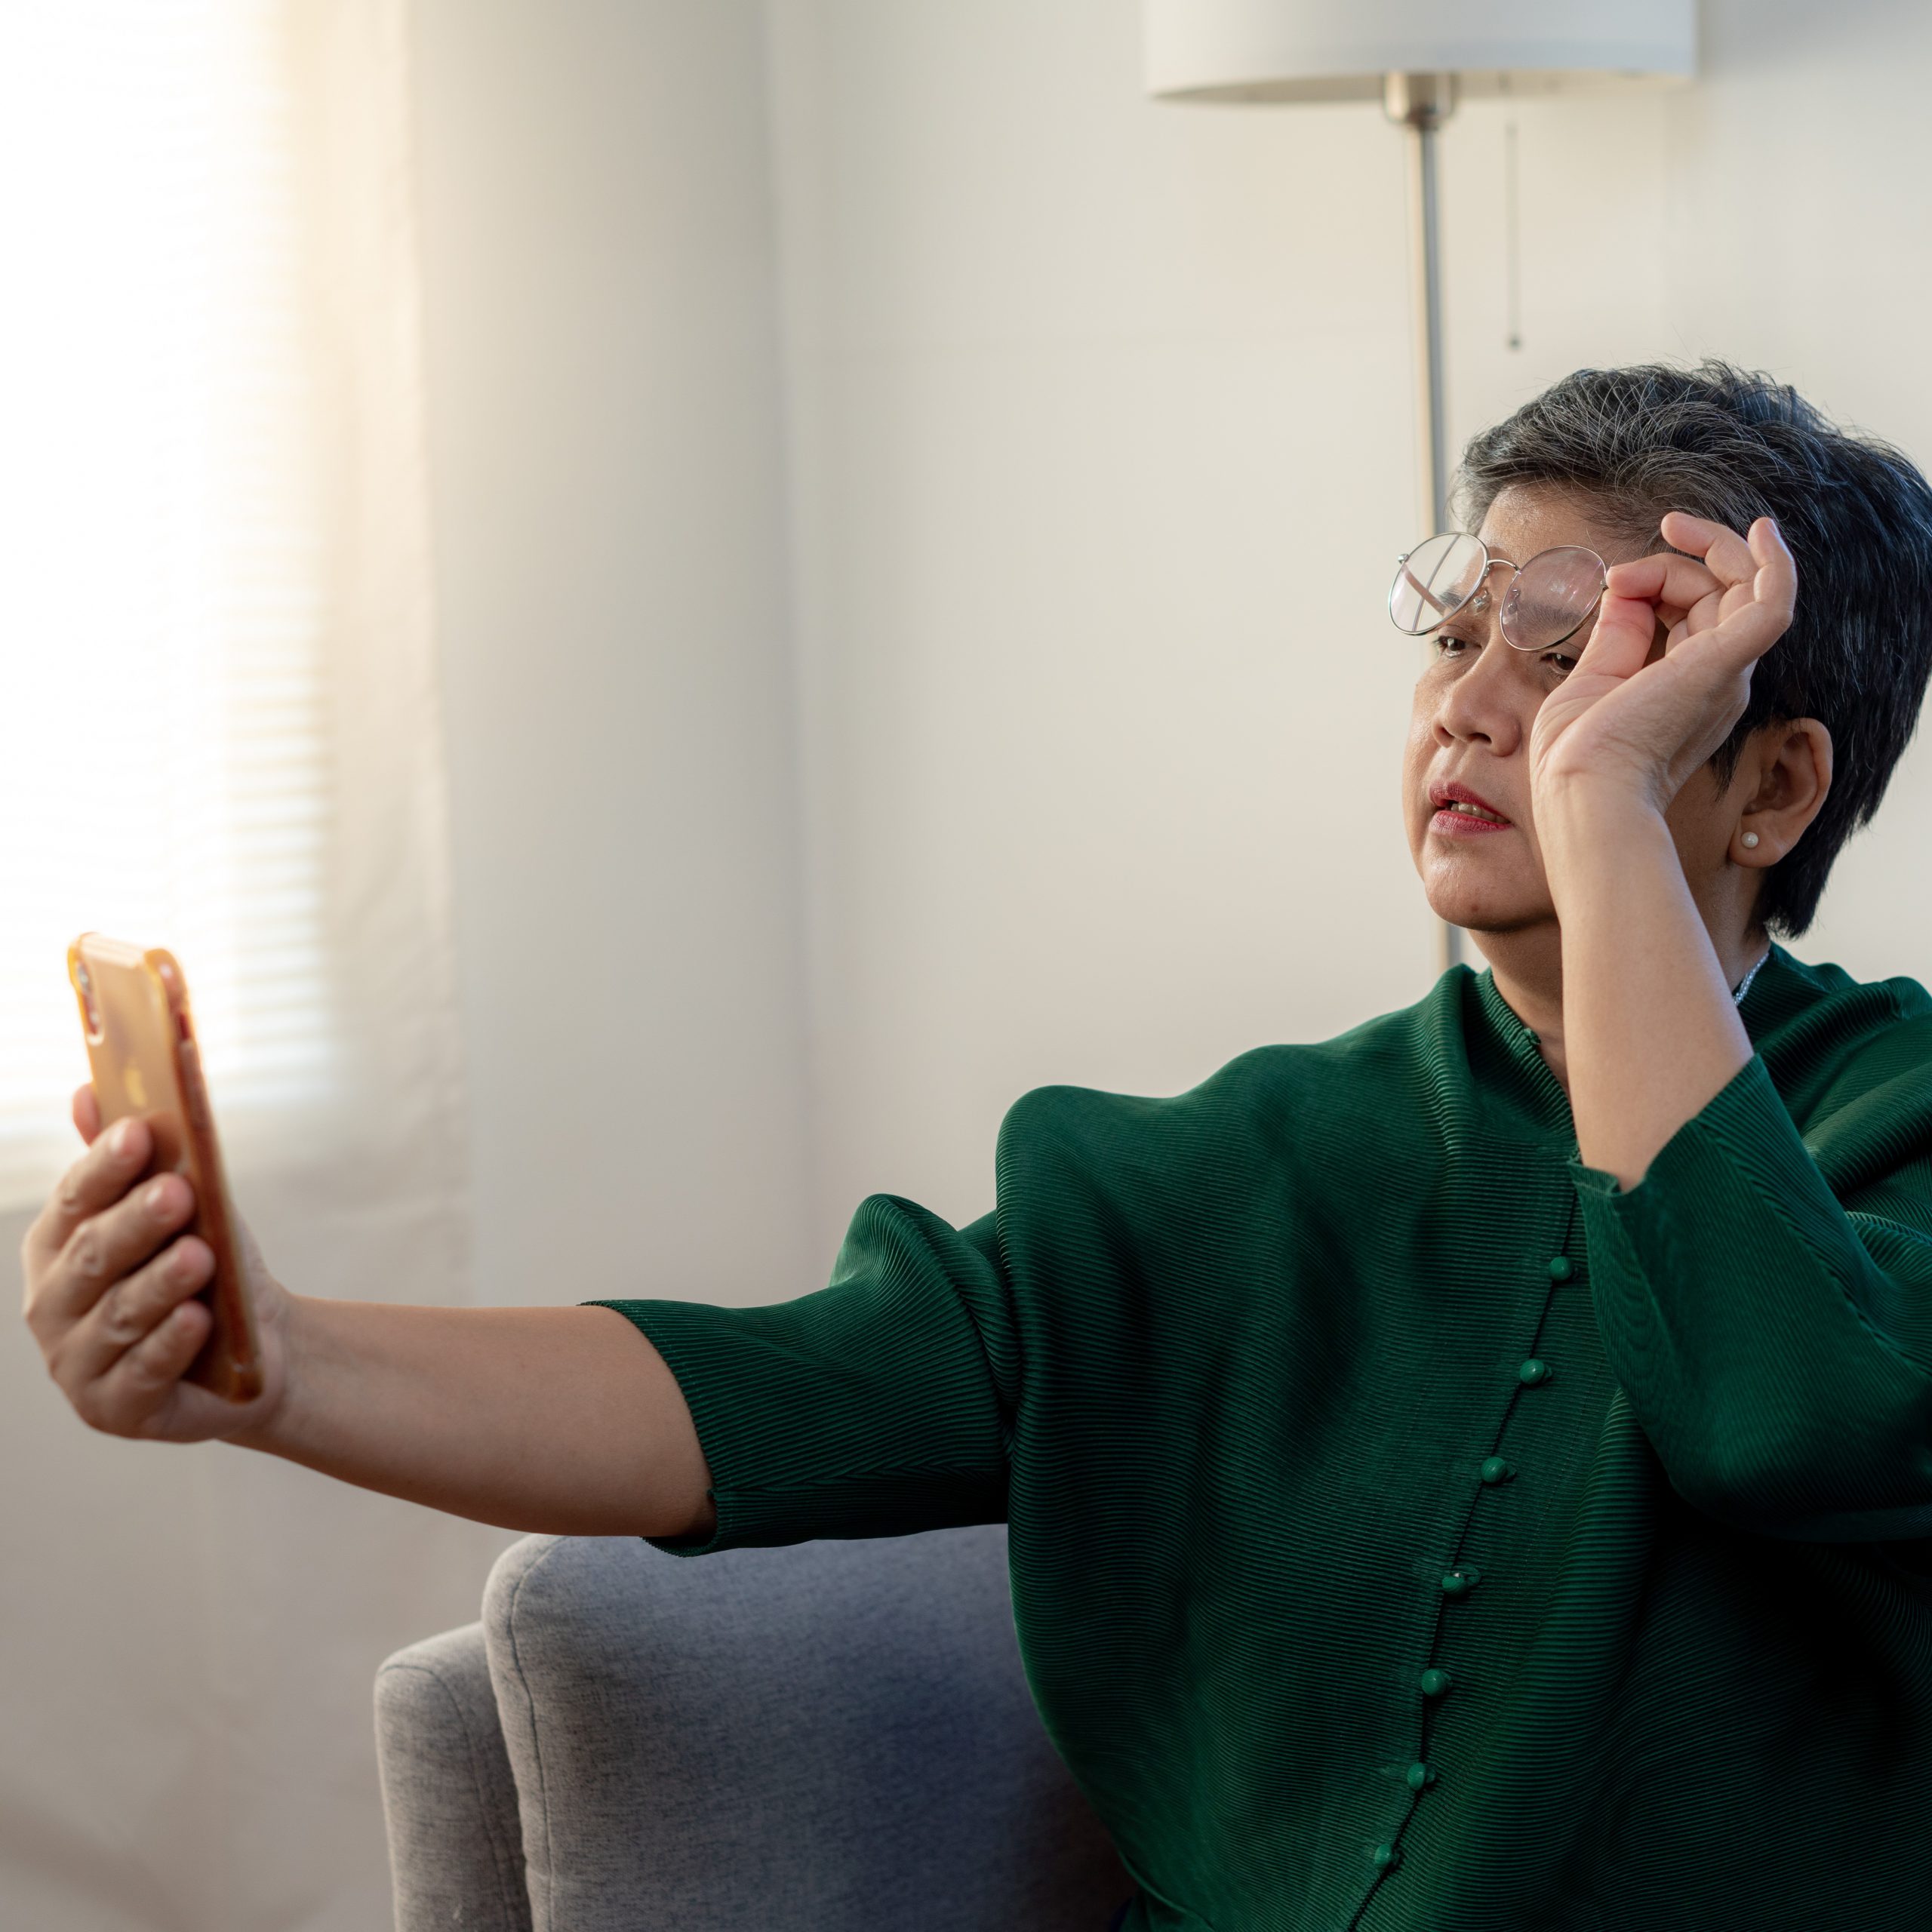 An elderly person raises his glasses to try to focus on his phone